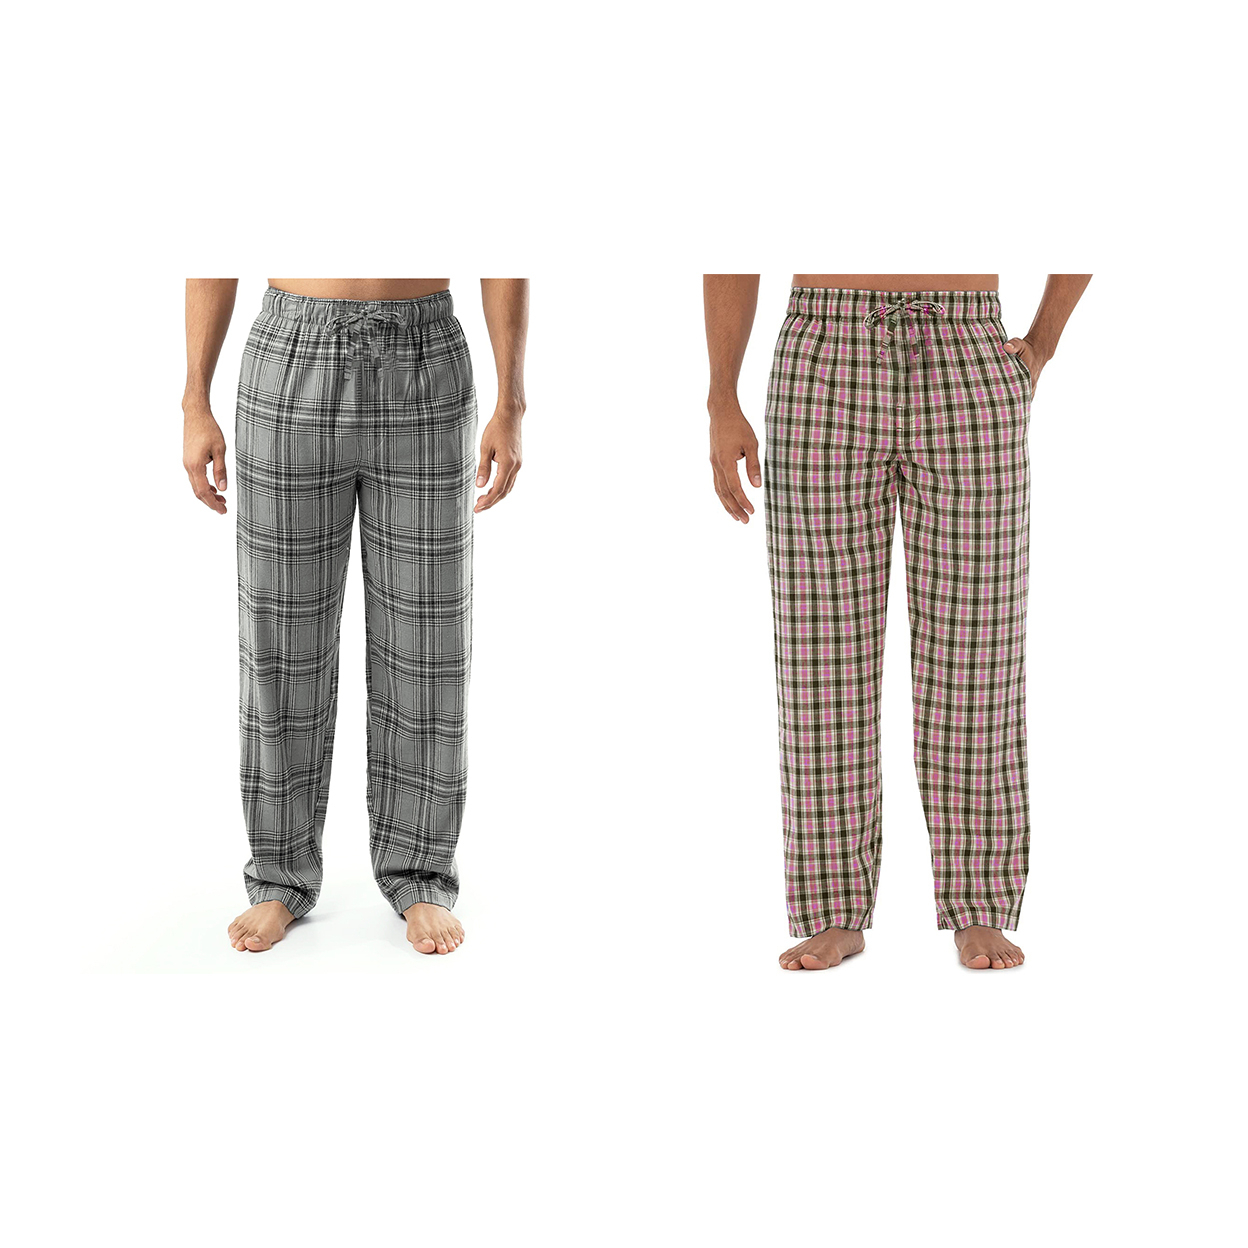 3-Pack: Men's Soft Jersey Knit Long Lounge Sleep Pants With Pockets - Solid & Plaid, Large